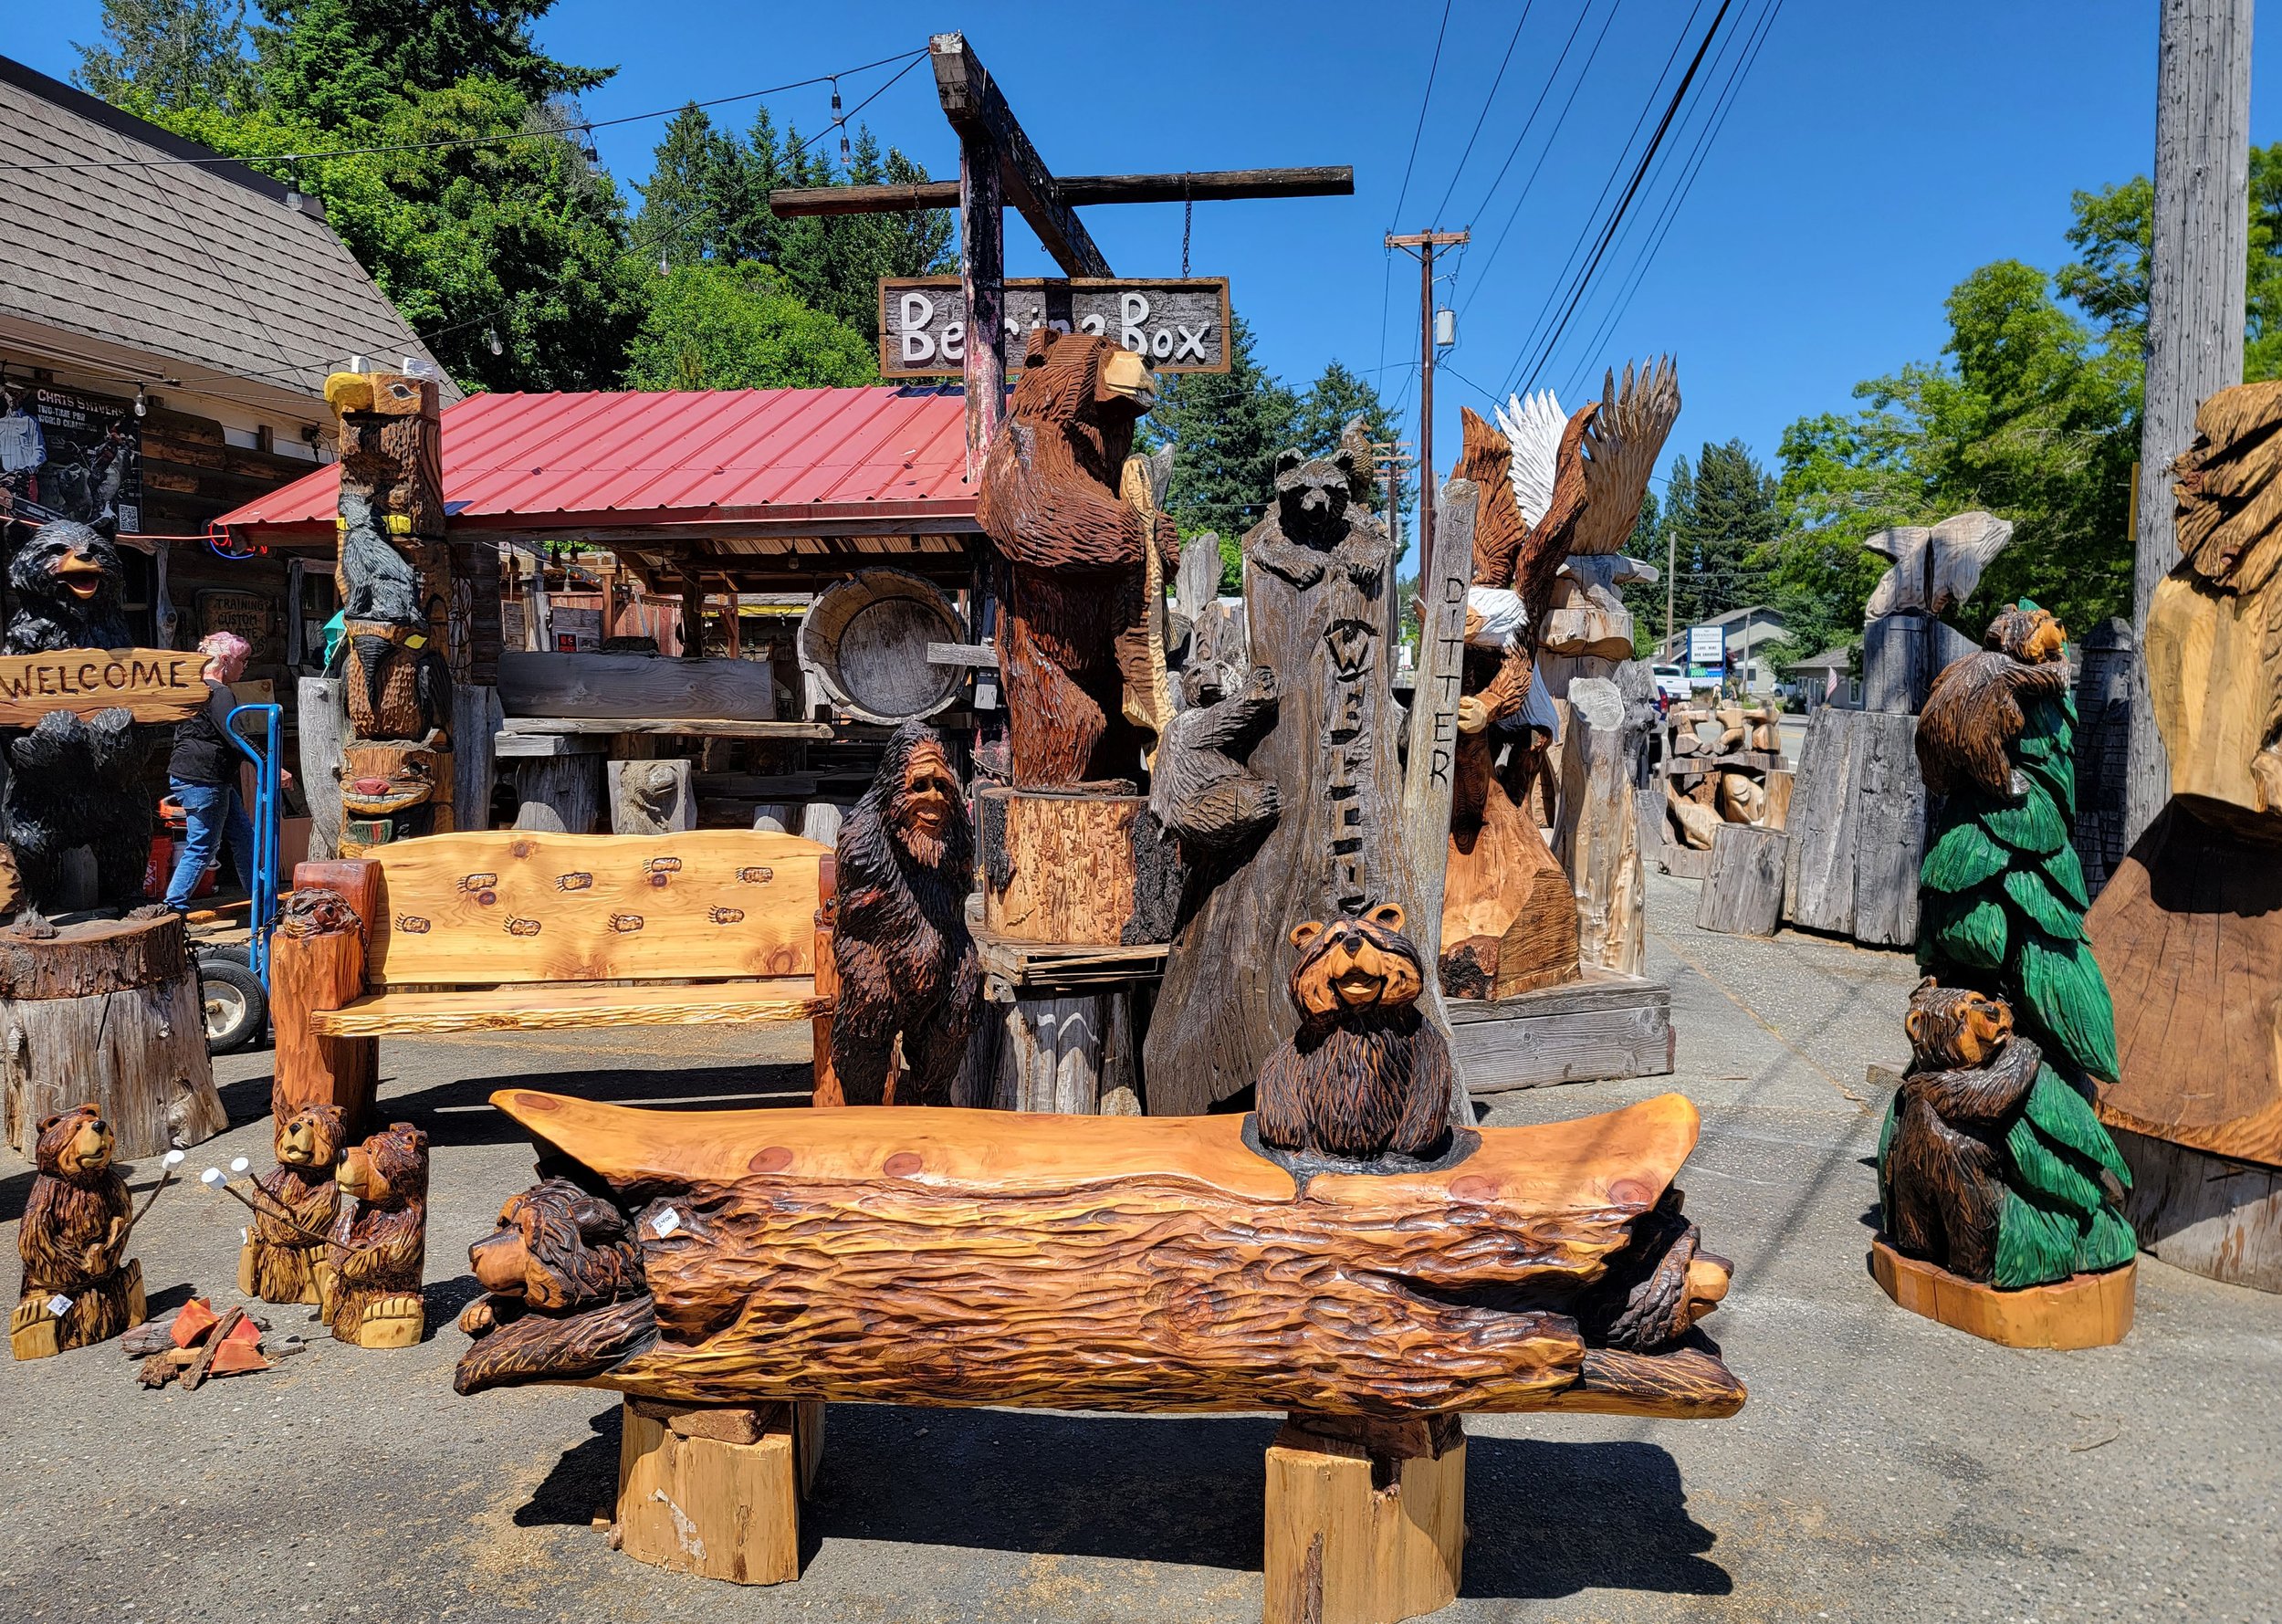  Passed by this chainsaw wood carving shop on the way back. Eagles, bigfoot and bears: The Pacific Northwest Trifecta. 